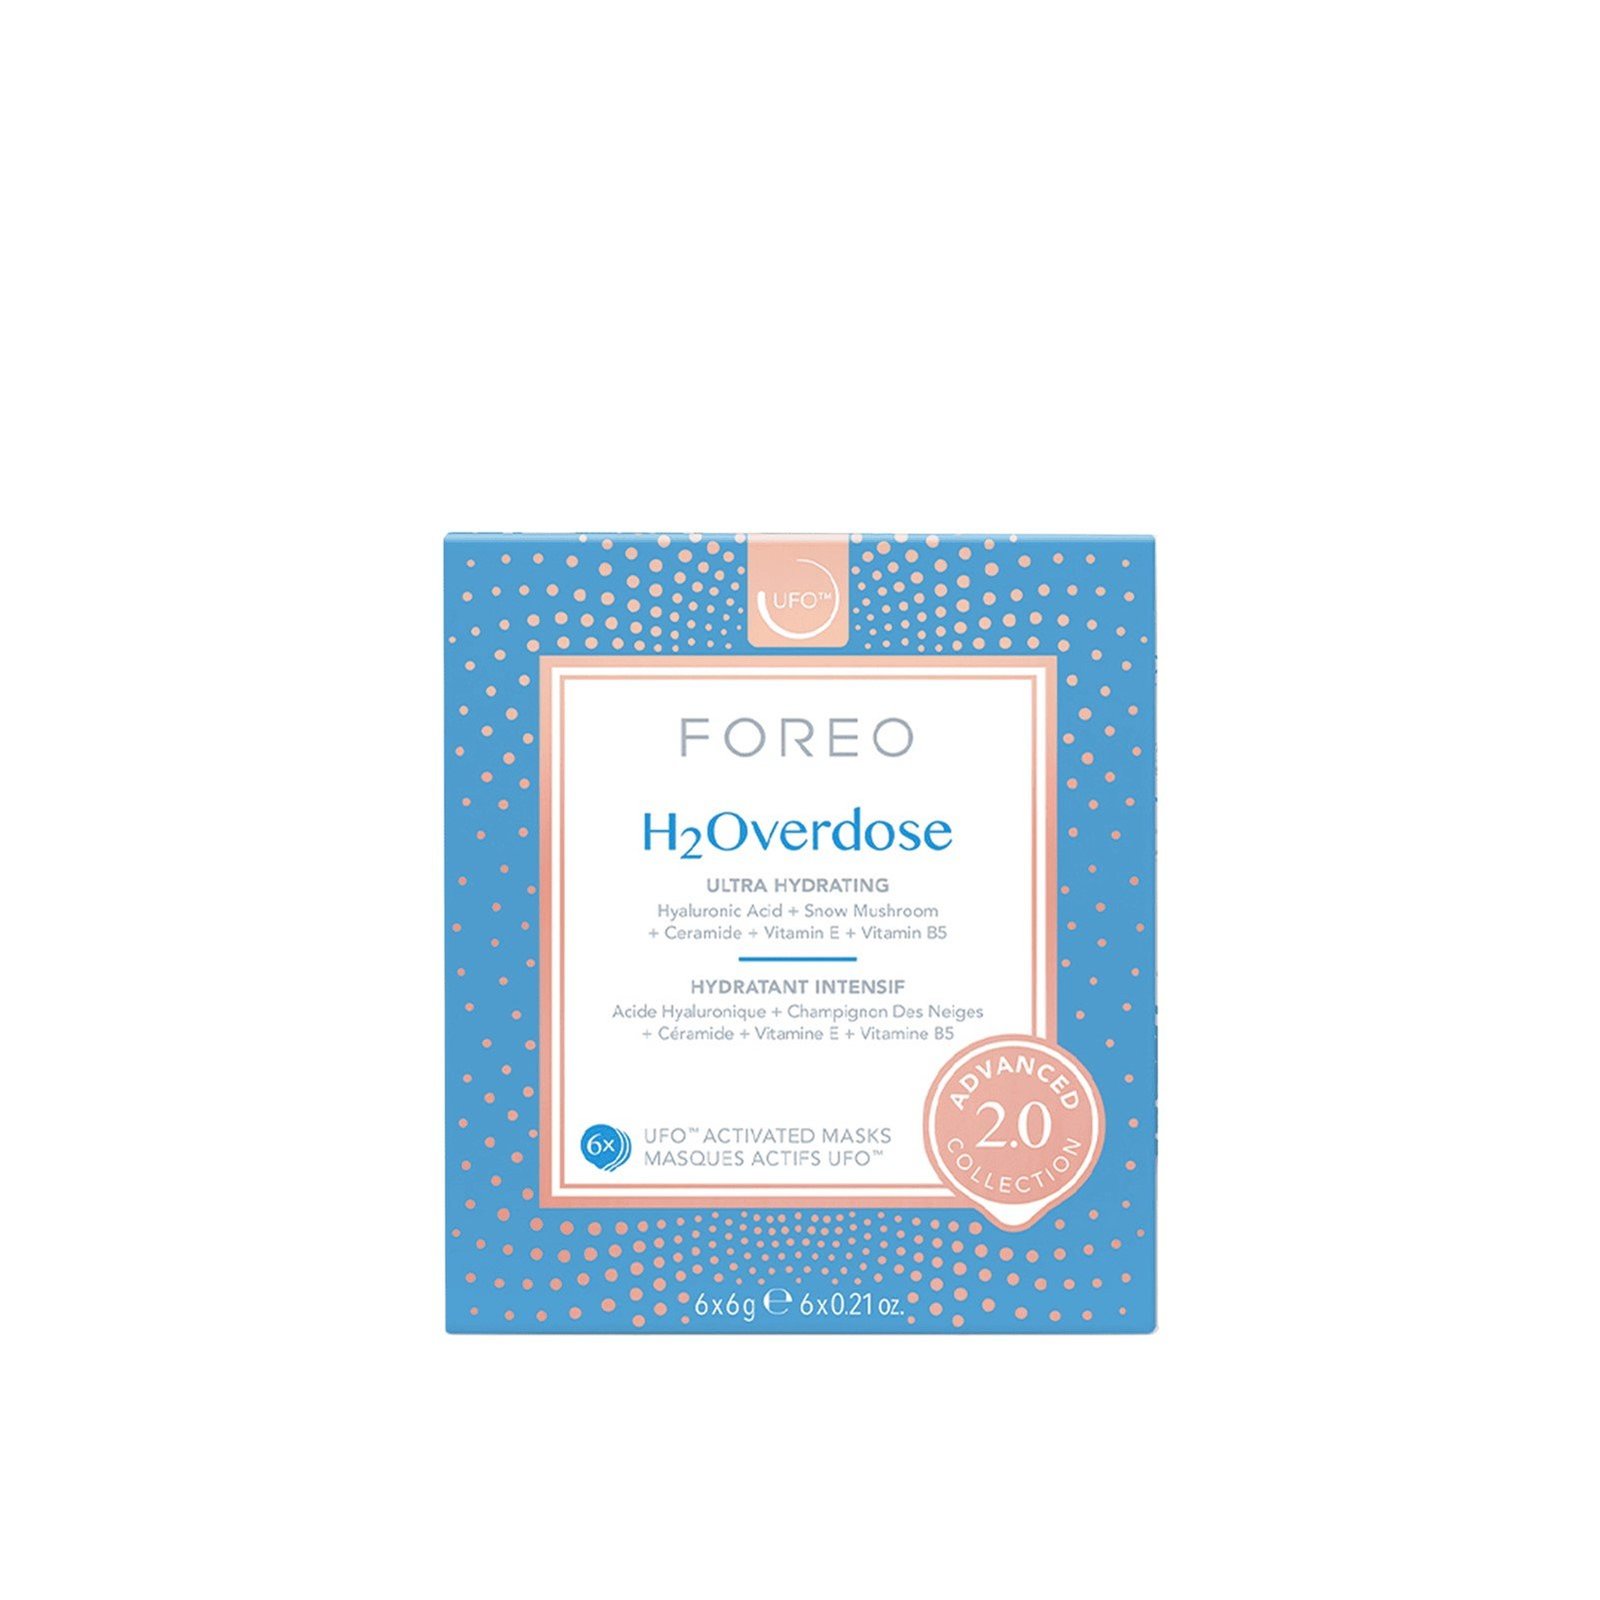 FOREO UFO™ Activated Facial Mask H2Overdose 2.0 6x6g (0.21oz x6)